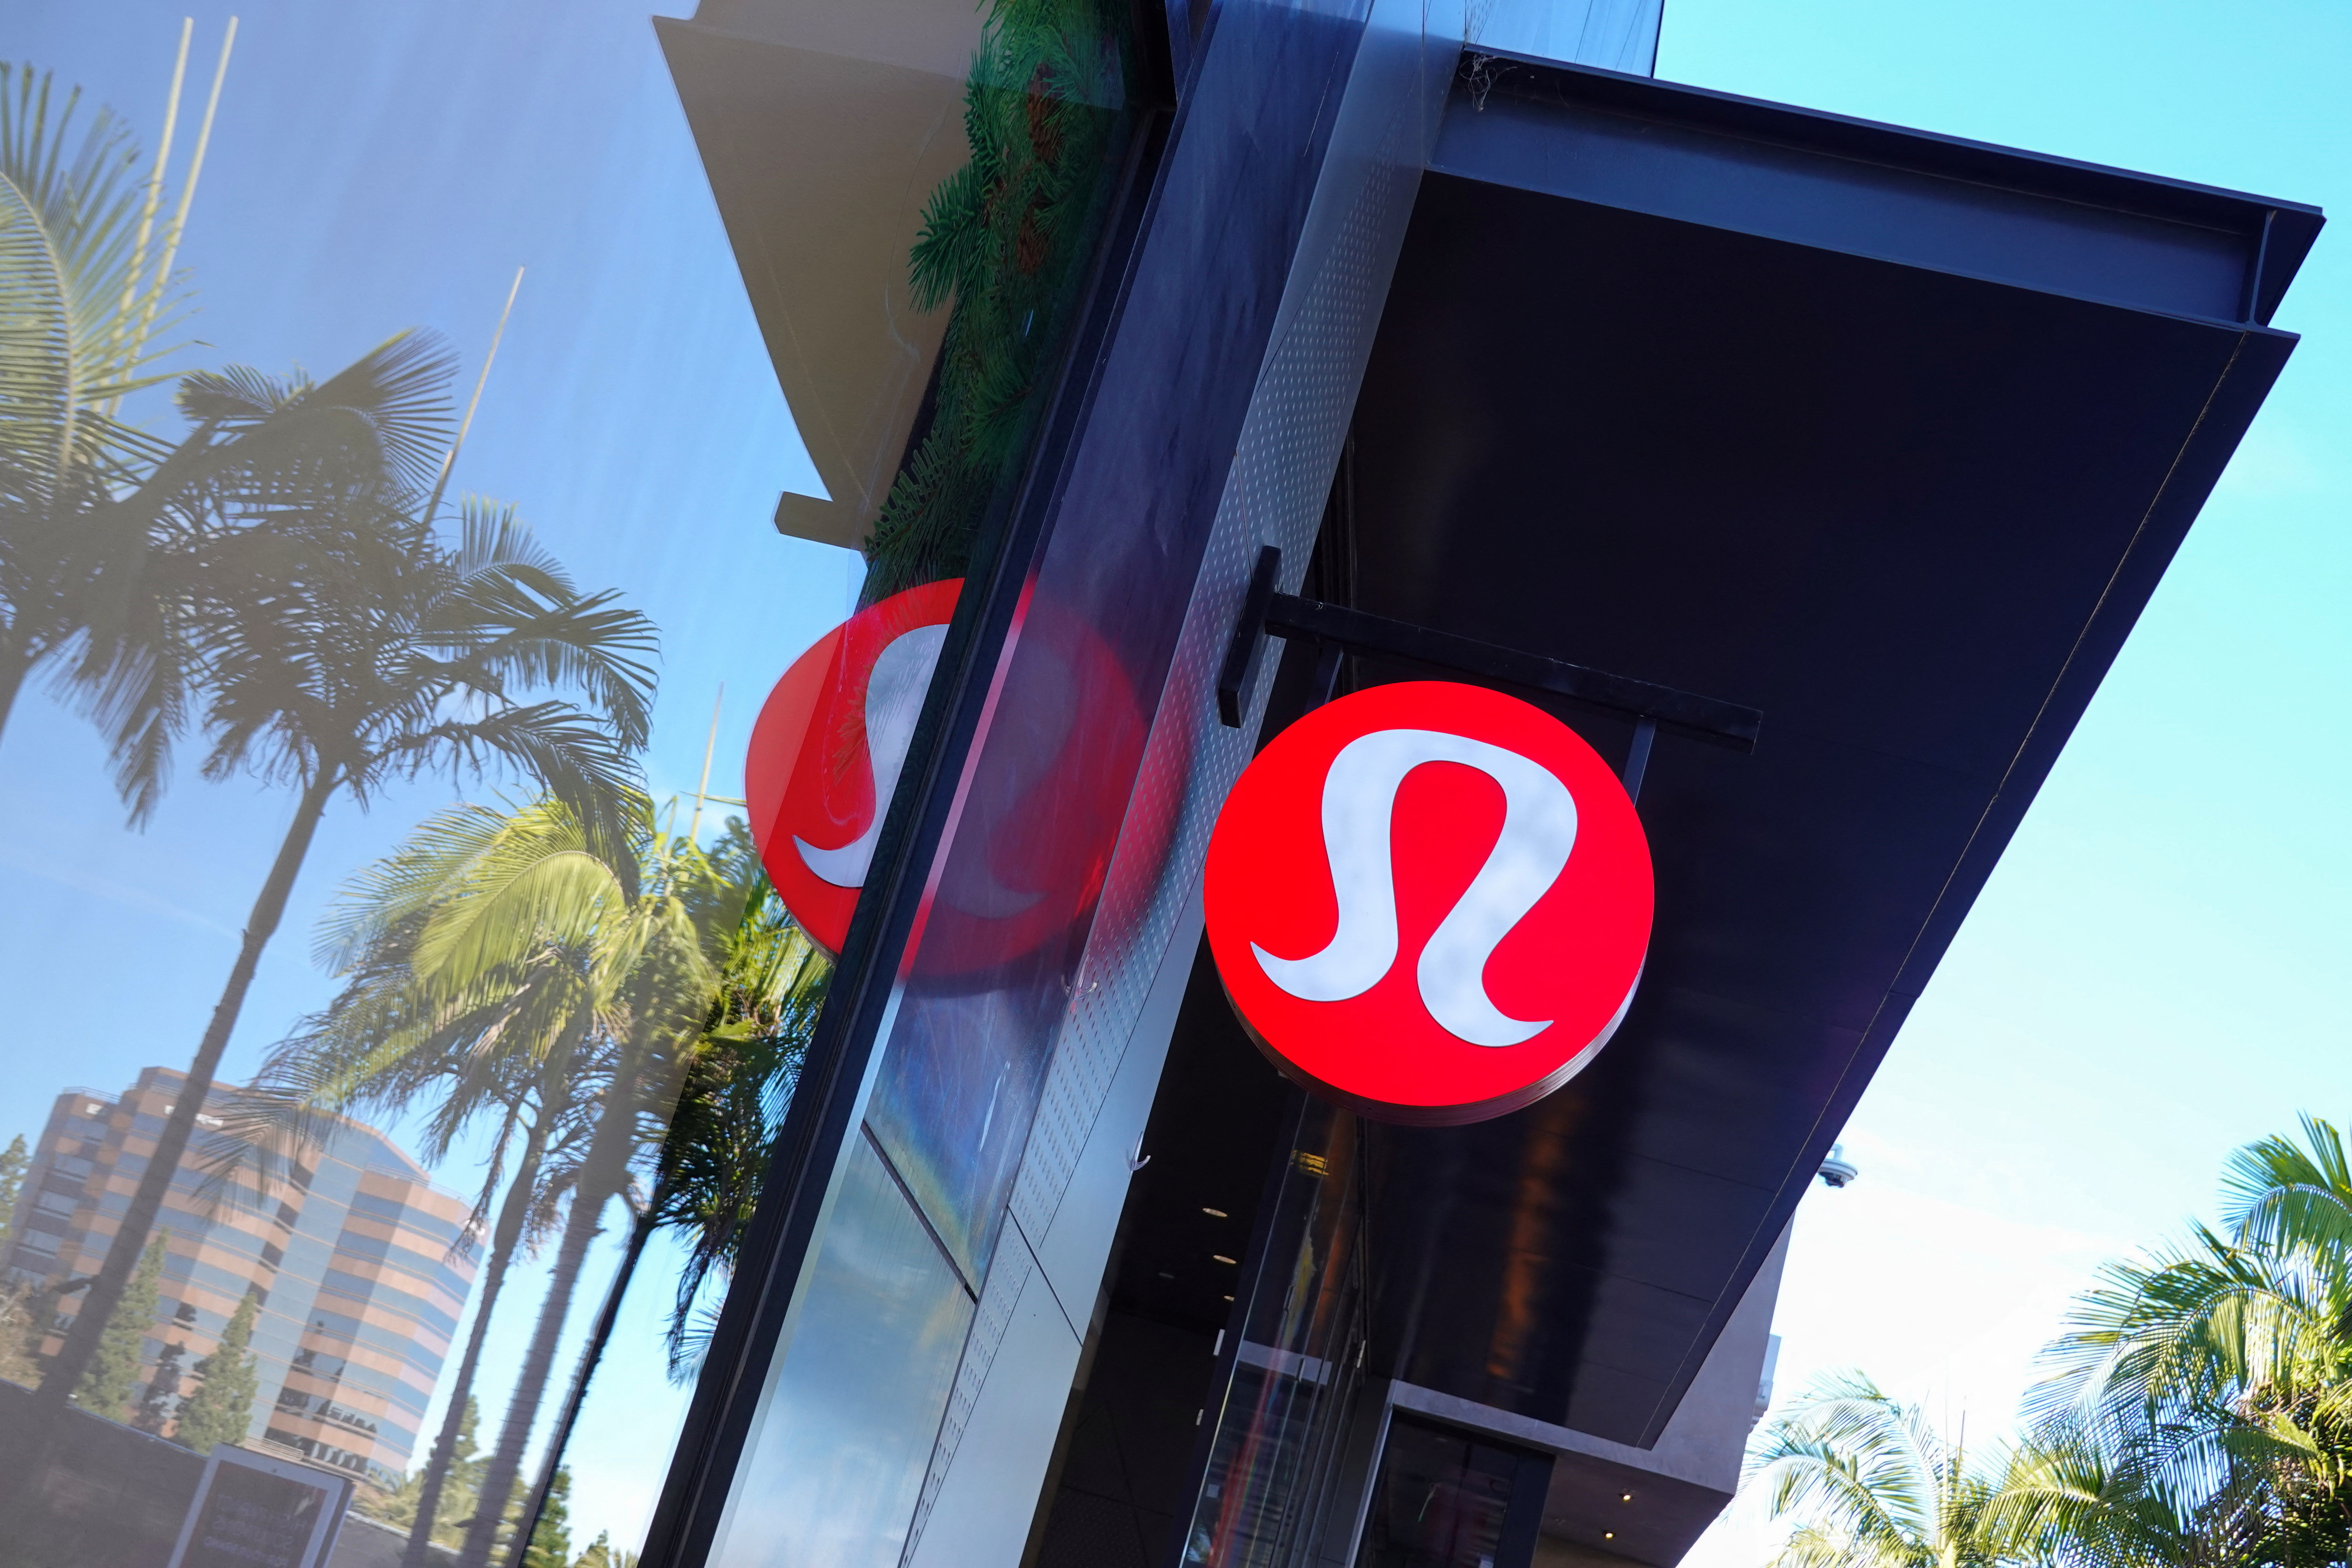 A Lululemon sign is seen at a shopping mall in California